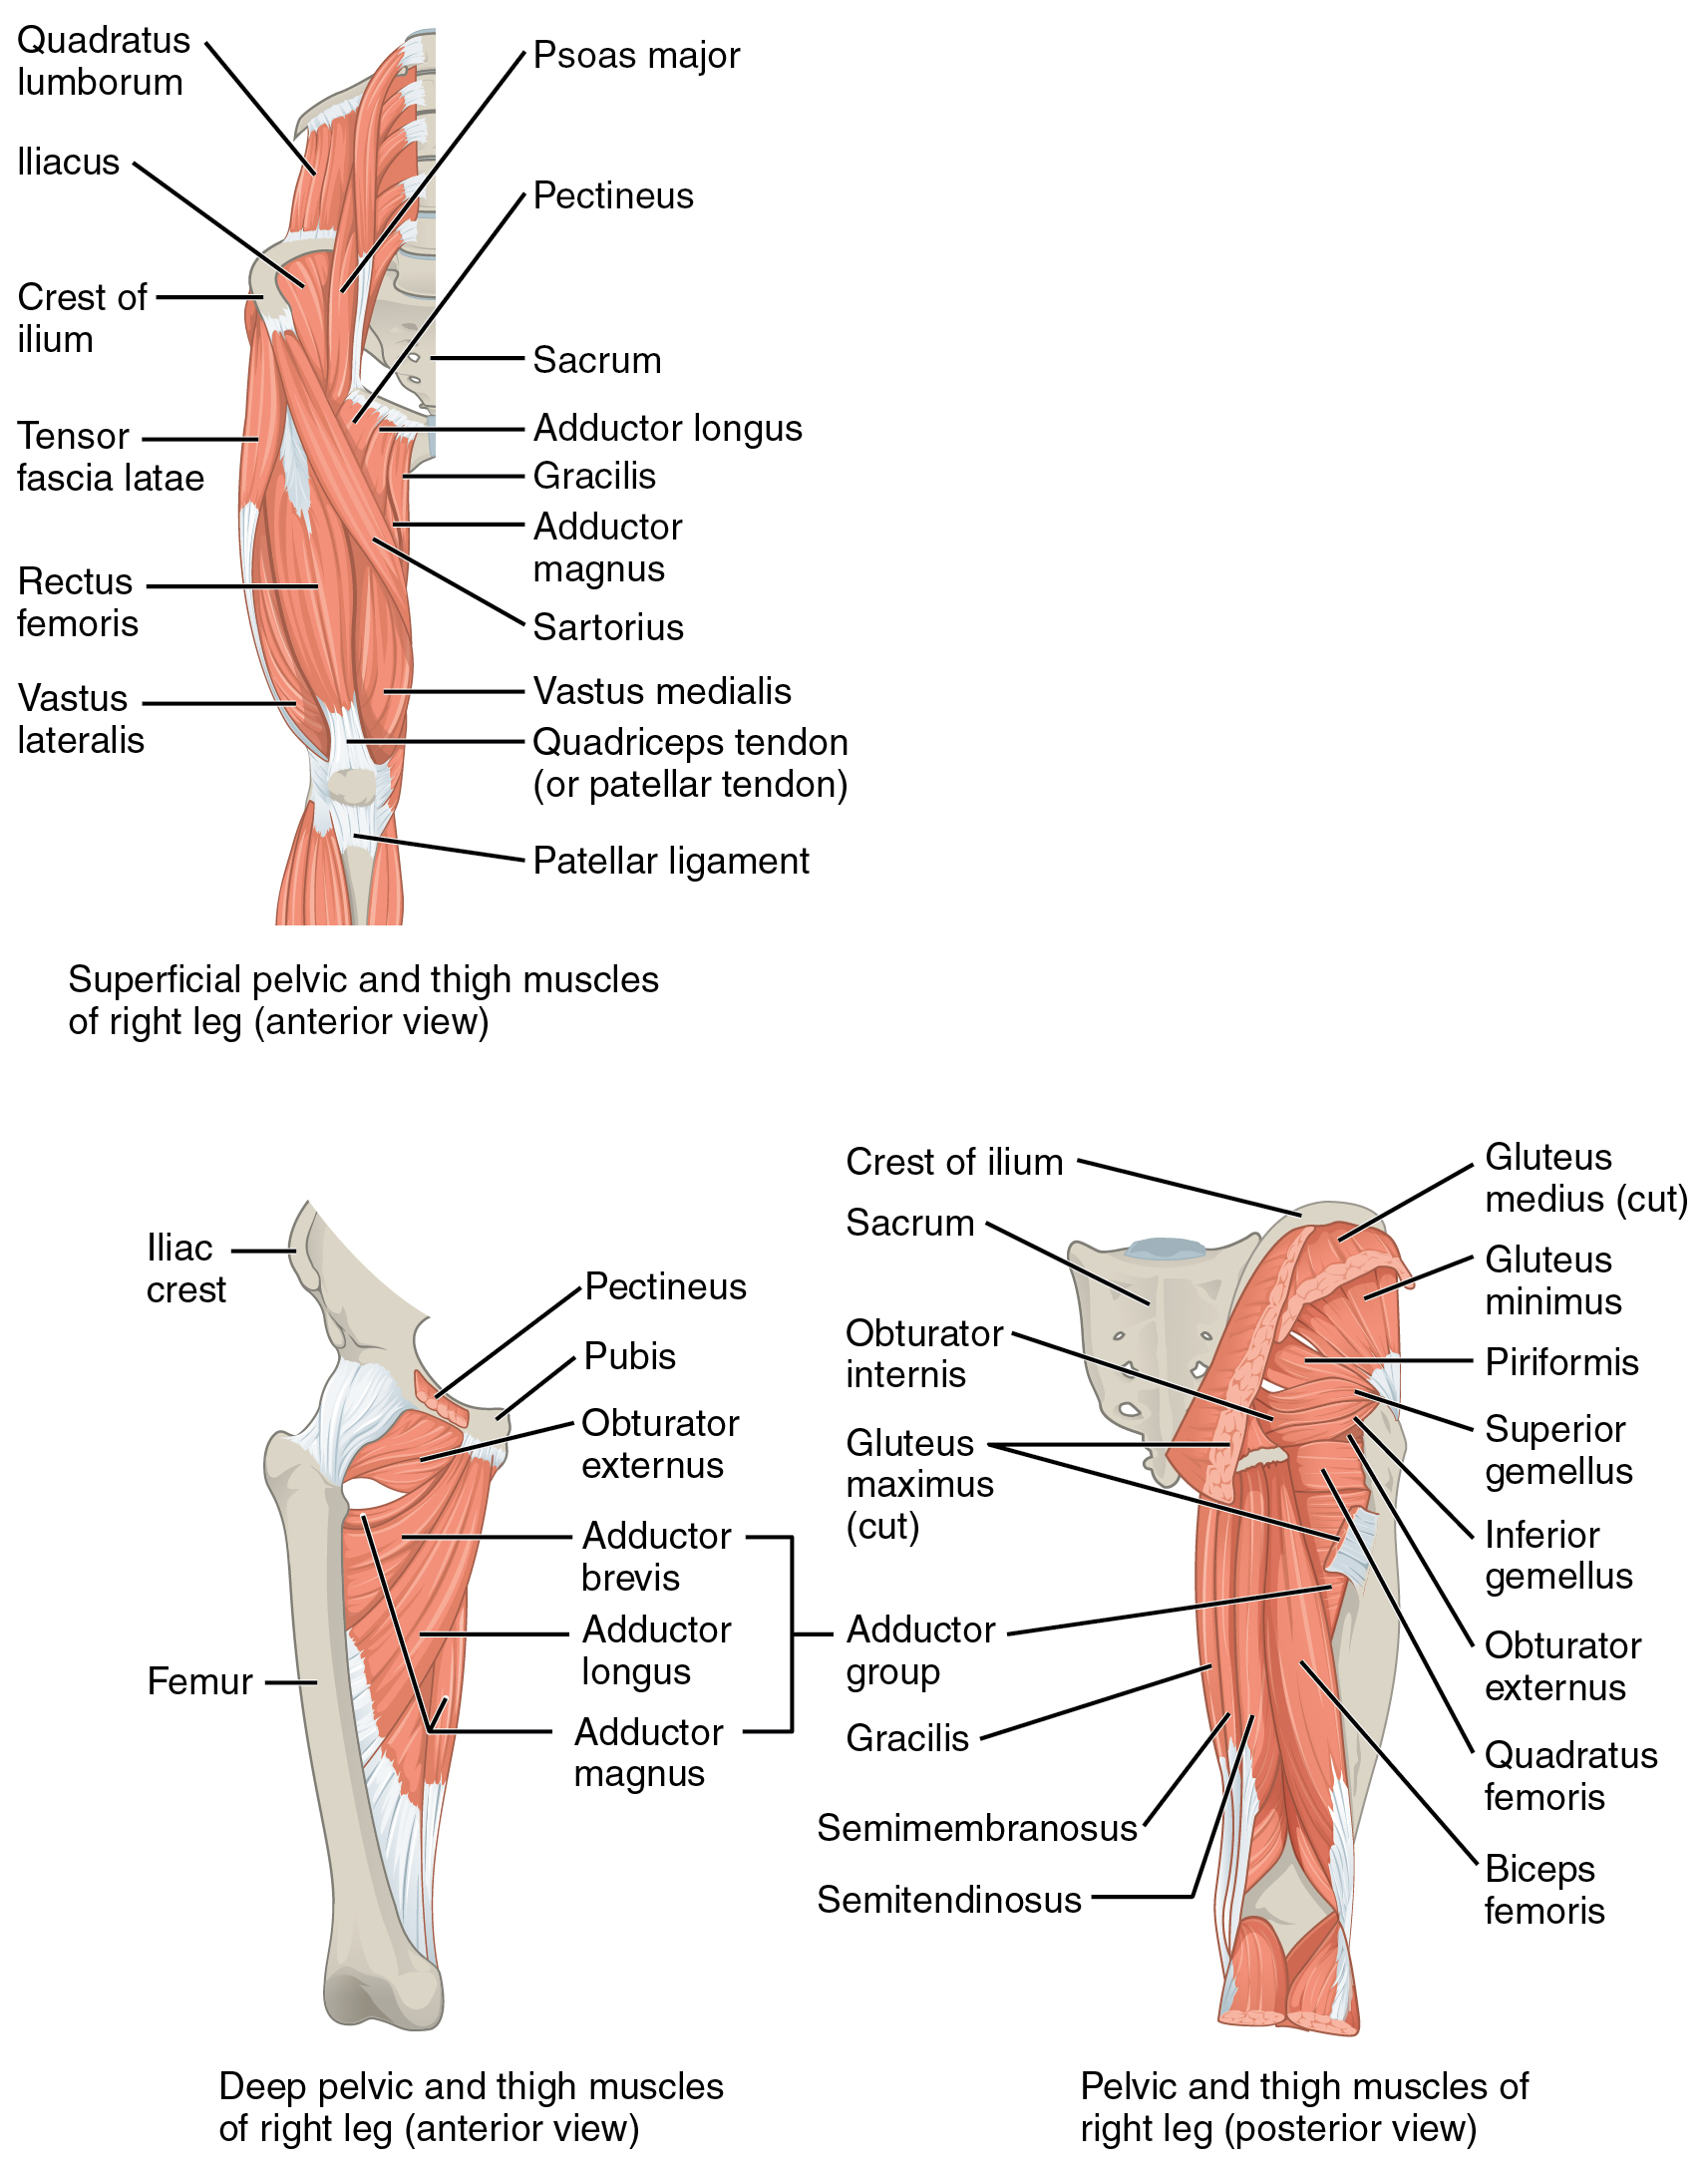 1122_Gluteal_Muscles_that_Move_the_Femur.jpg